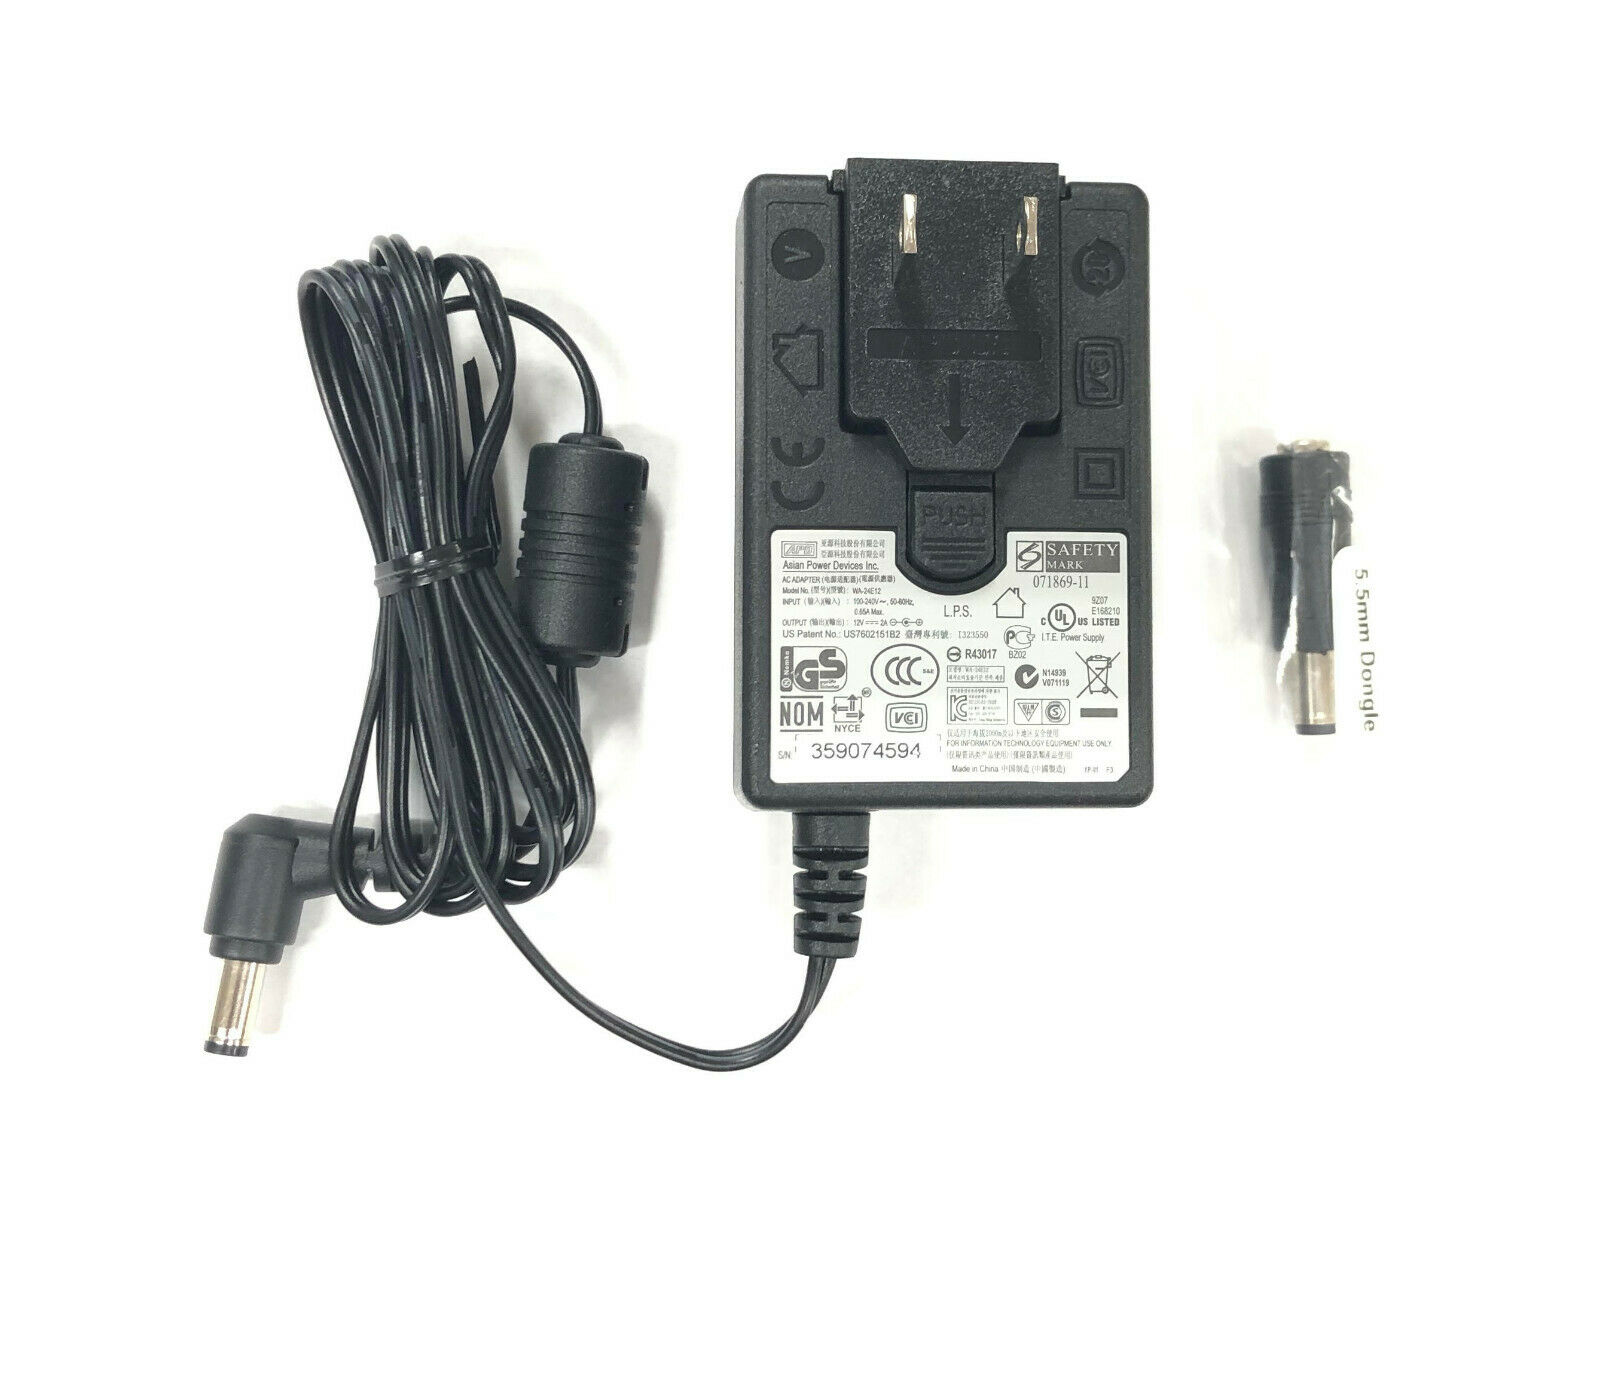 New Original ADP 12V AC Adapter For Maxtor OneTouch 4,OneTouch 4 Plus WA-24E12 Compatible Brand: Maxtor Type: AC &